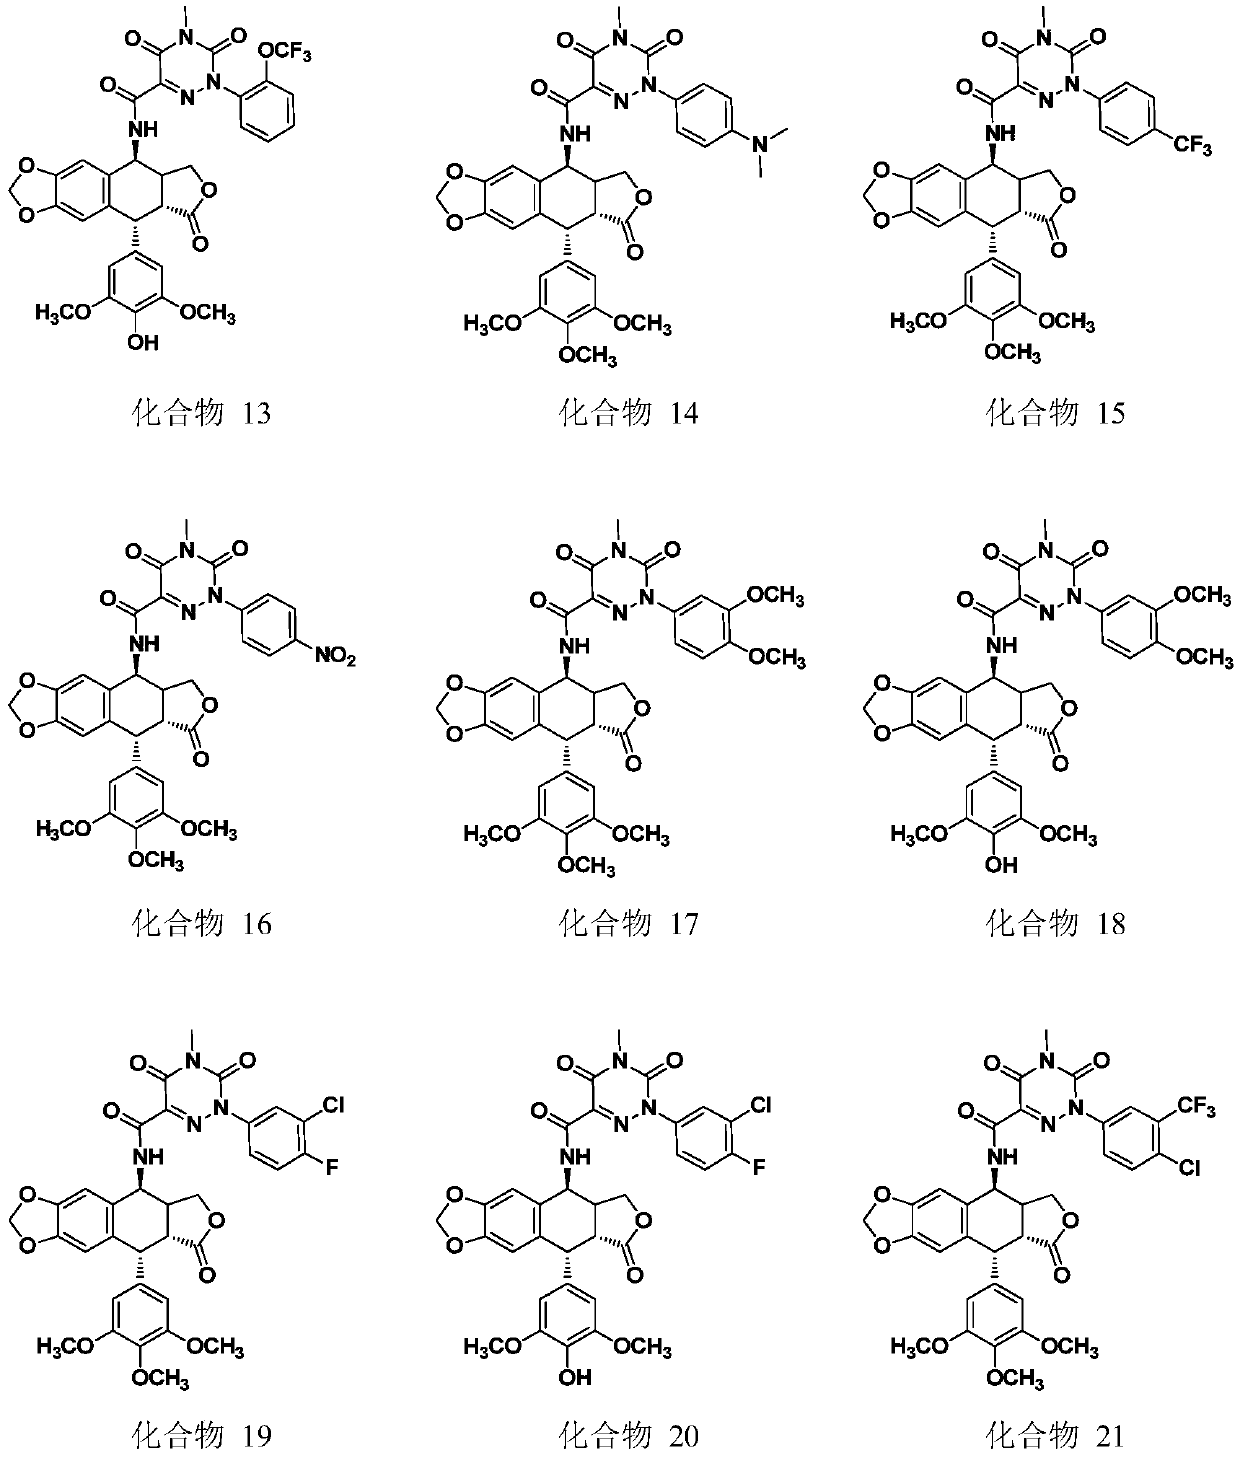 Podophyllotoxin compounds containing 1,2,4-triazone structure and application thereof